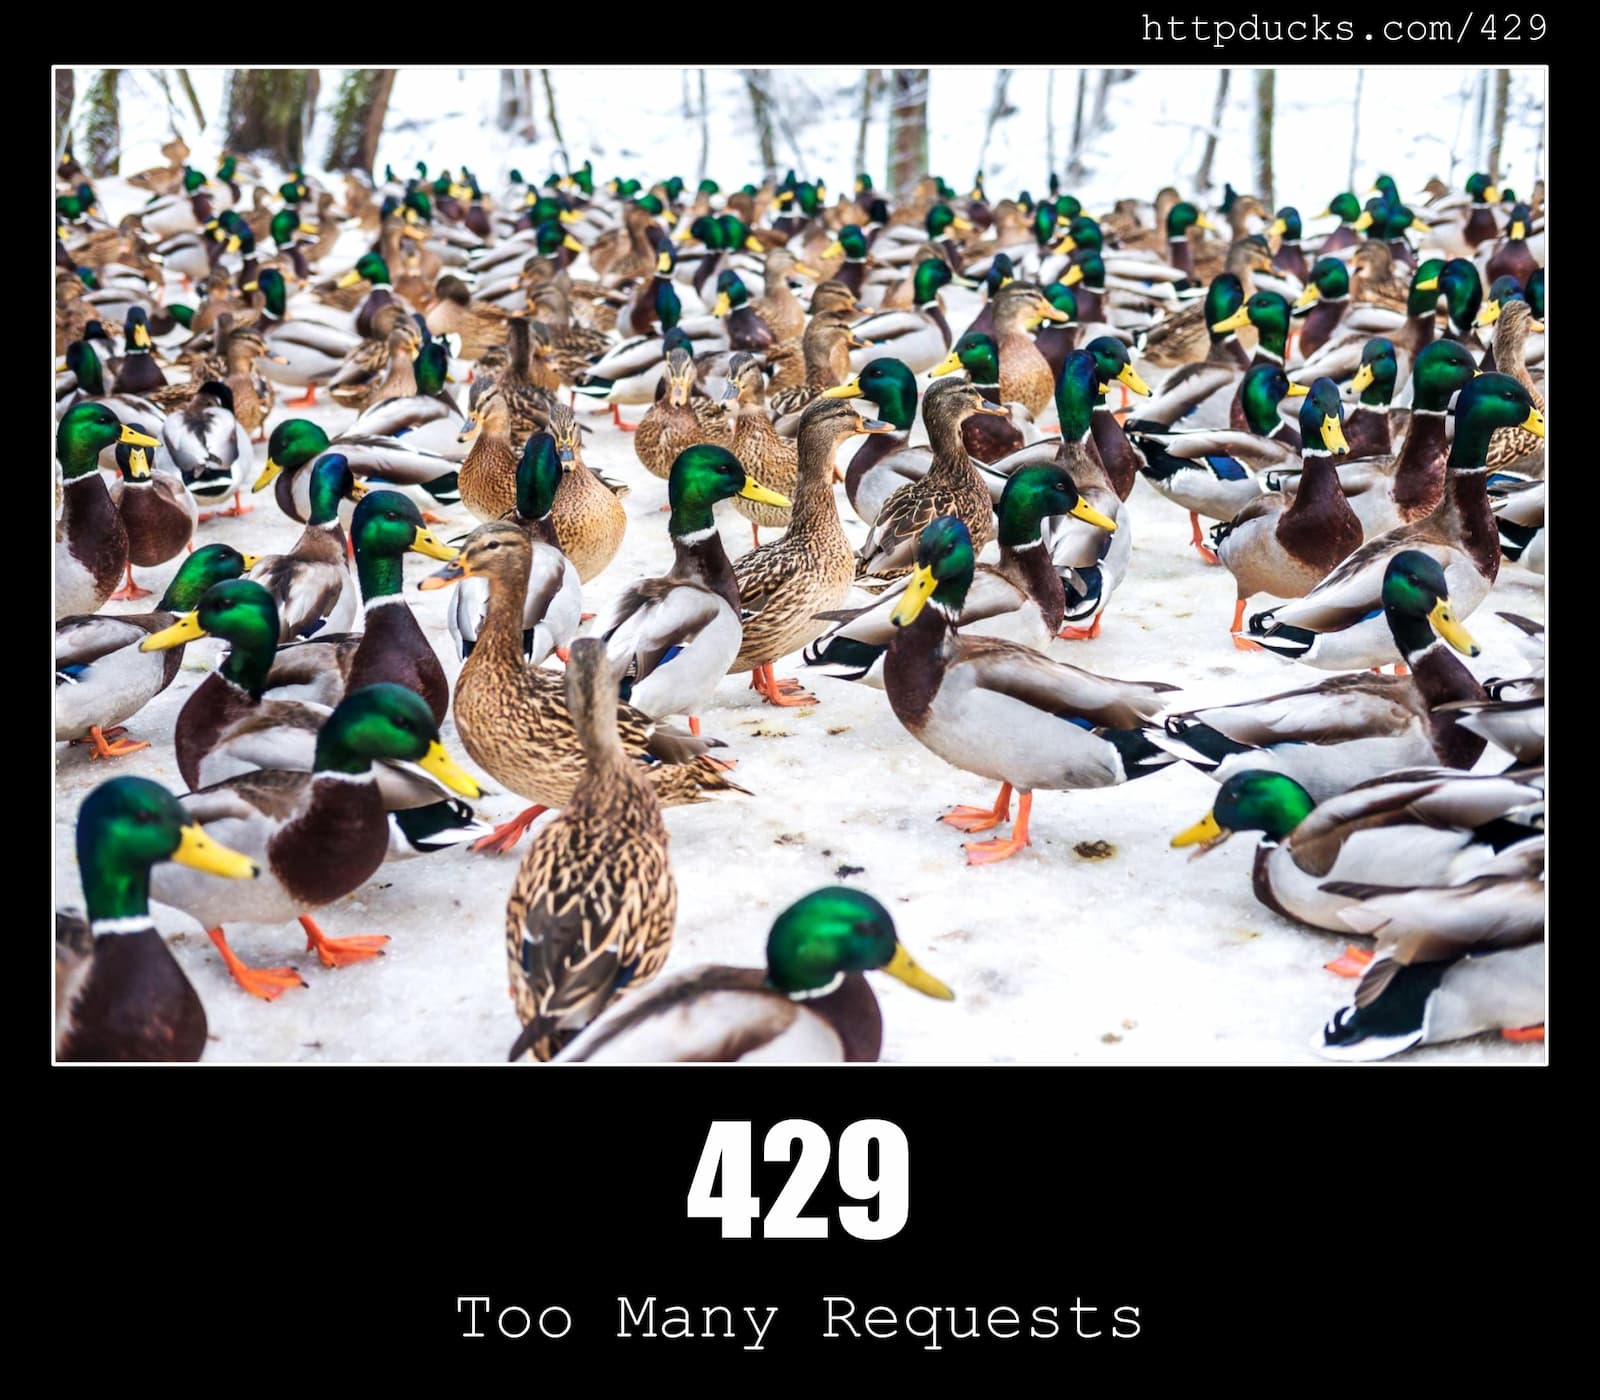 429 Too Many Requests - HTTP status code and ducks!